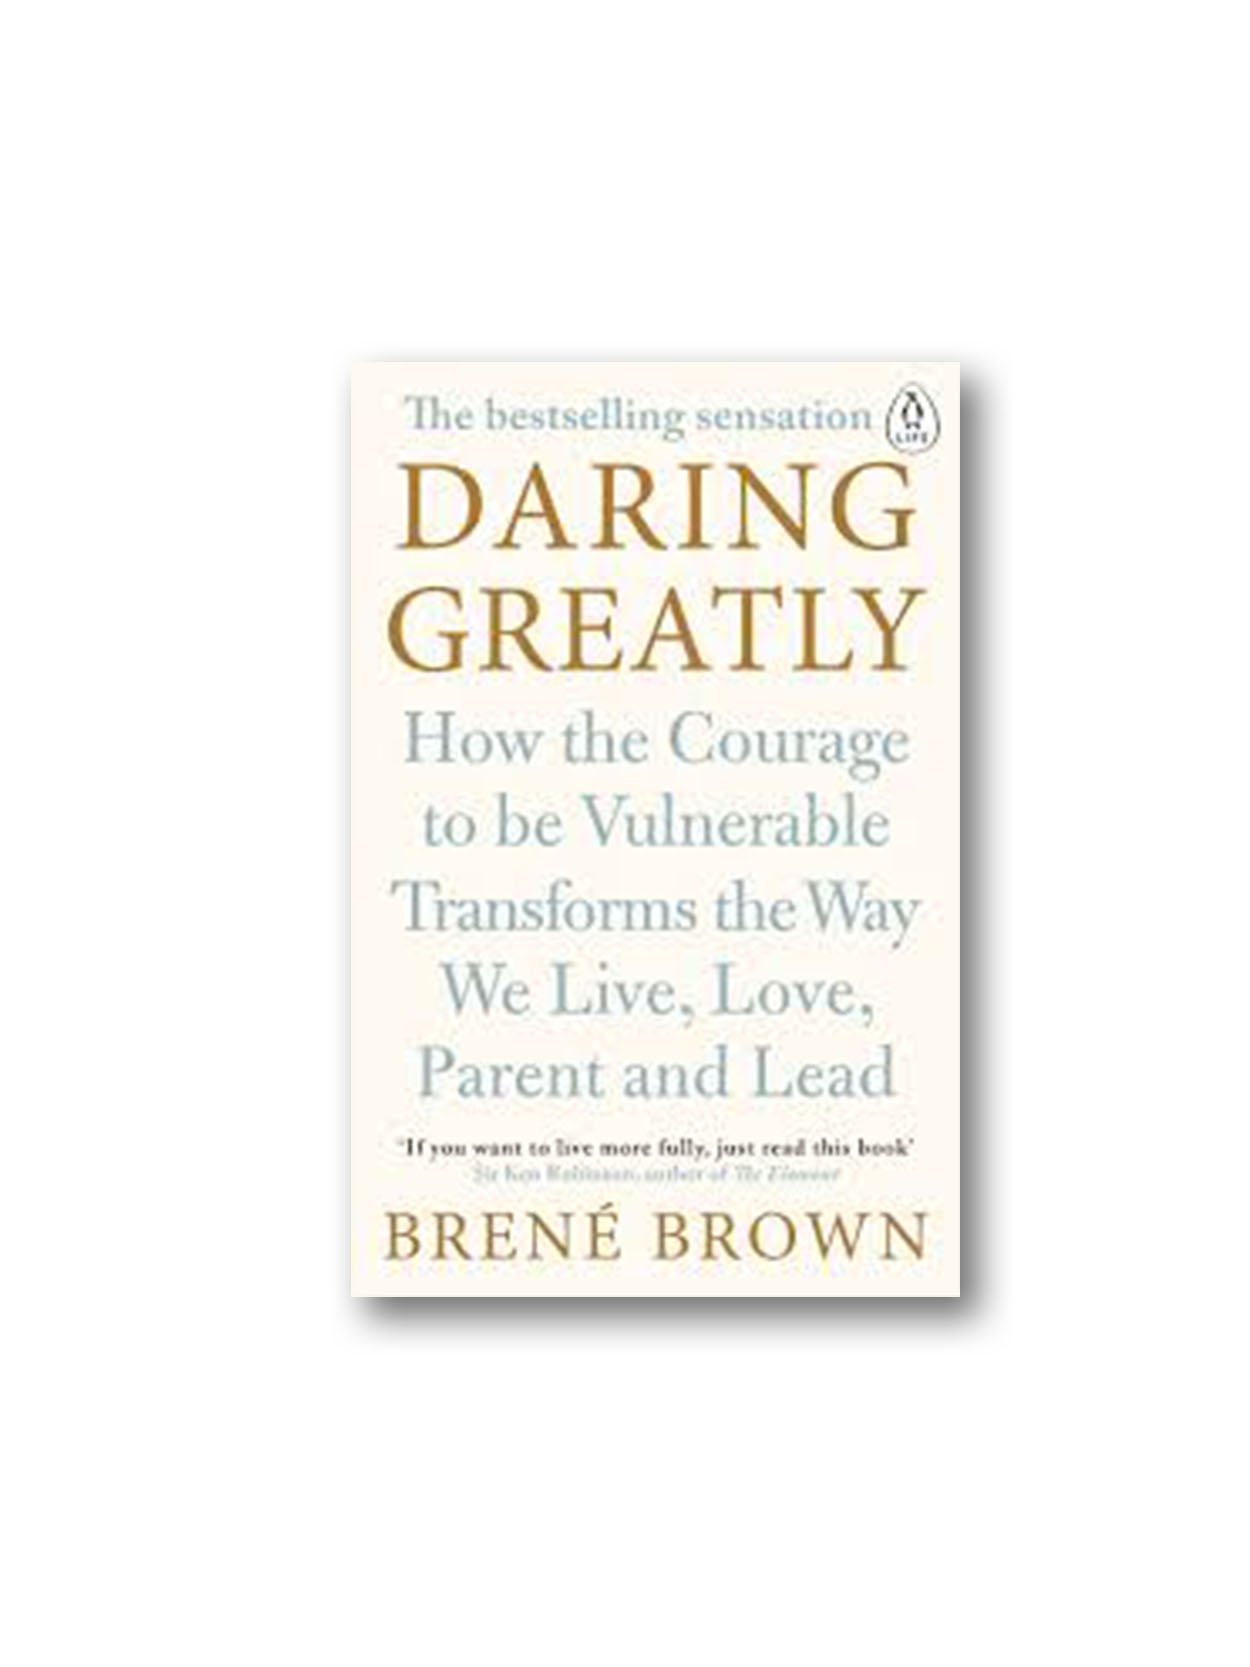 Books　Daring　the　Courage　Greatly　Transforms　Be　–　How　the　Minoa　Way　W　to　Vulnerable